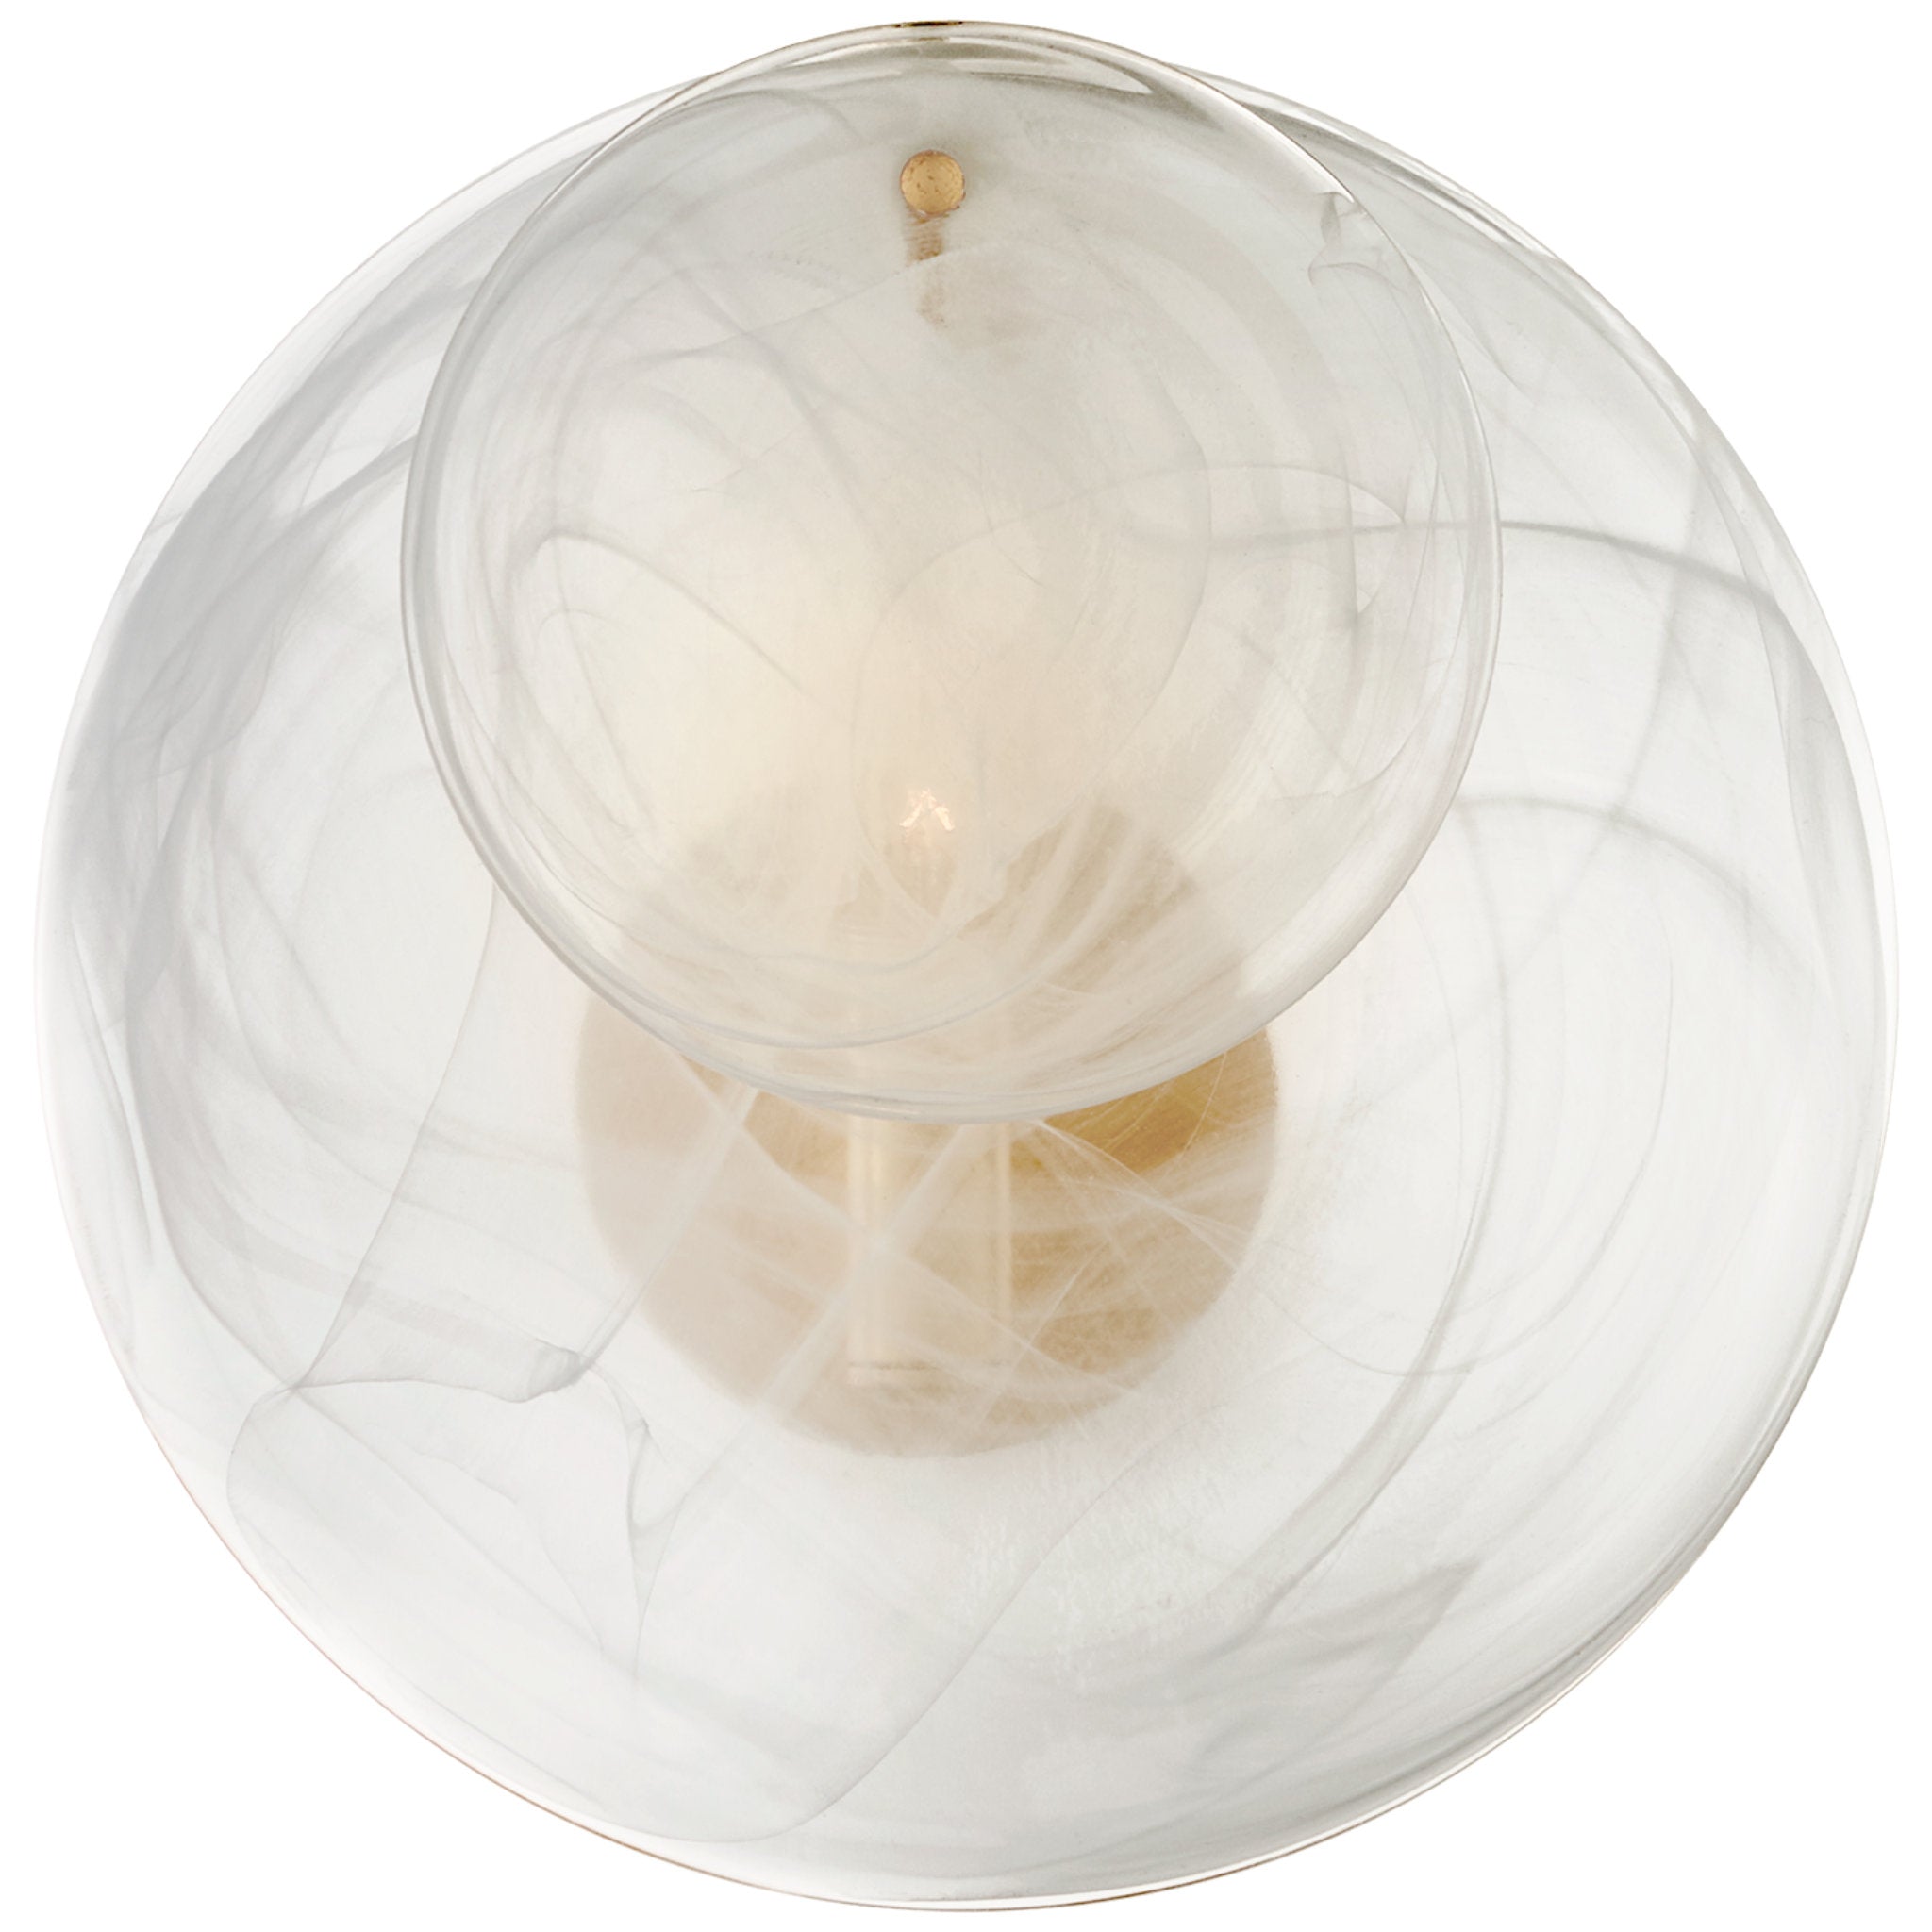 AERIN Loire Small Sconce in Gild with White Strie Glass